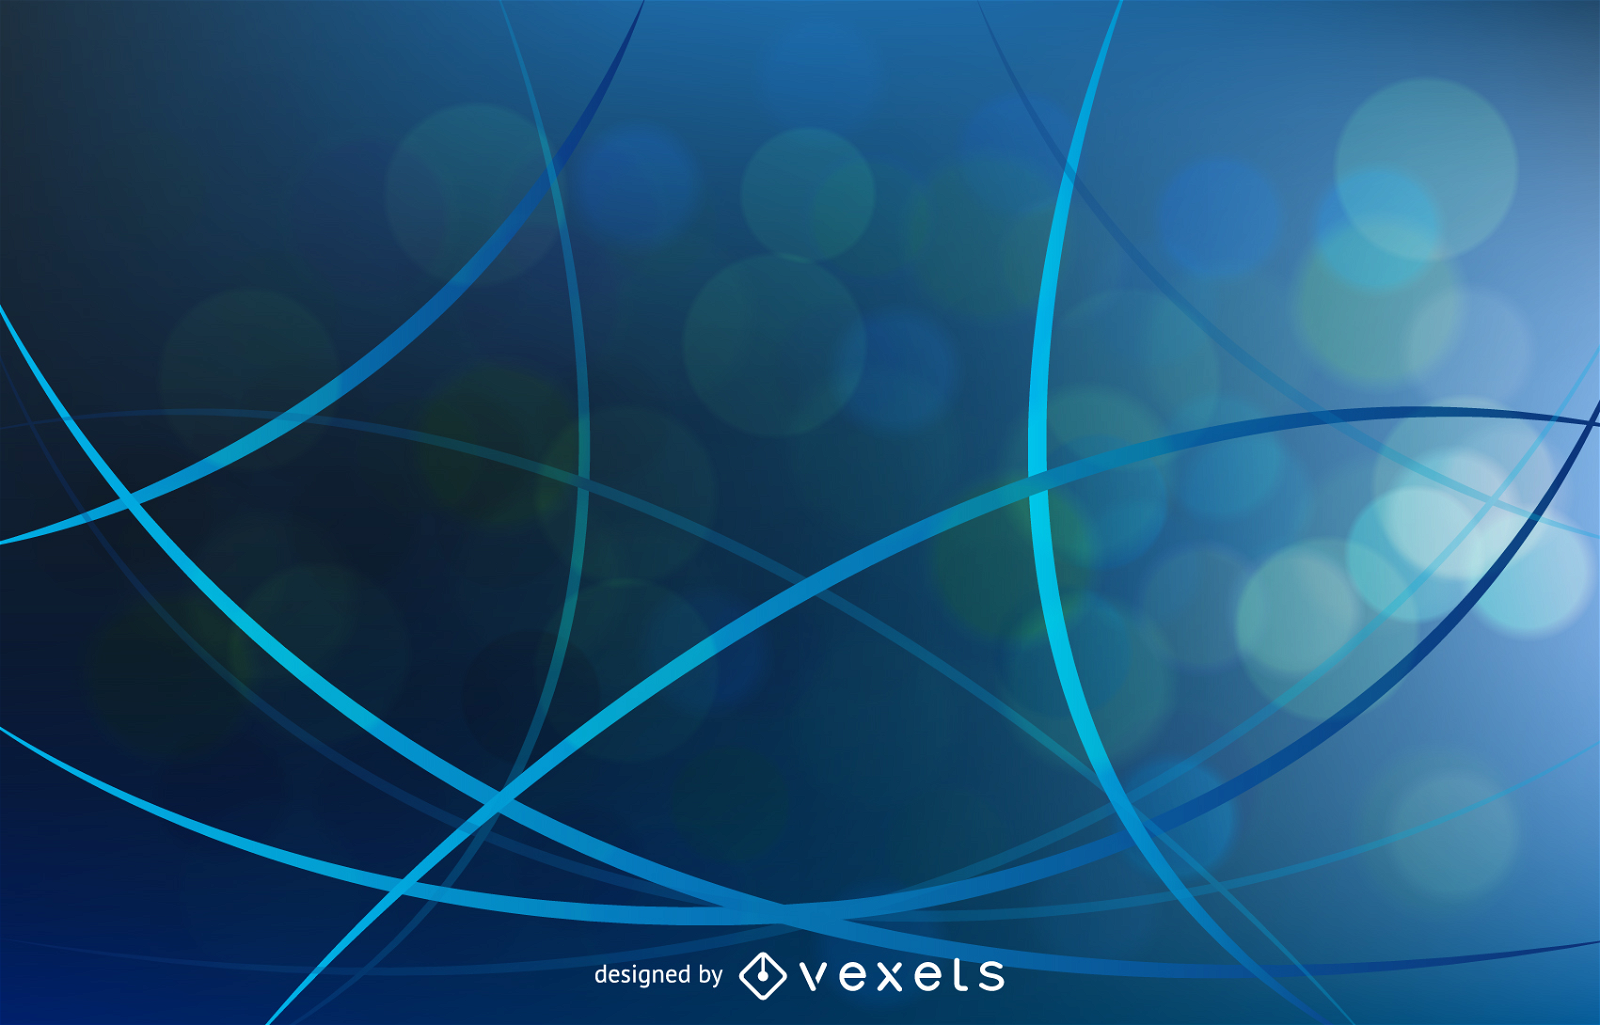 Abstract Background with Blue Curves Vector Illustration